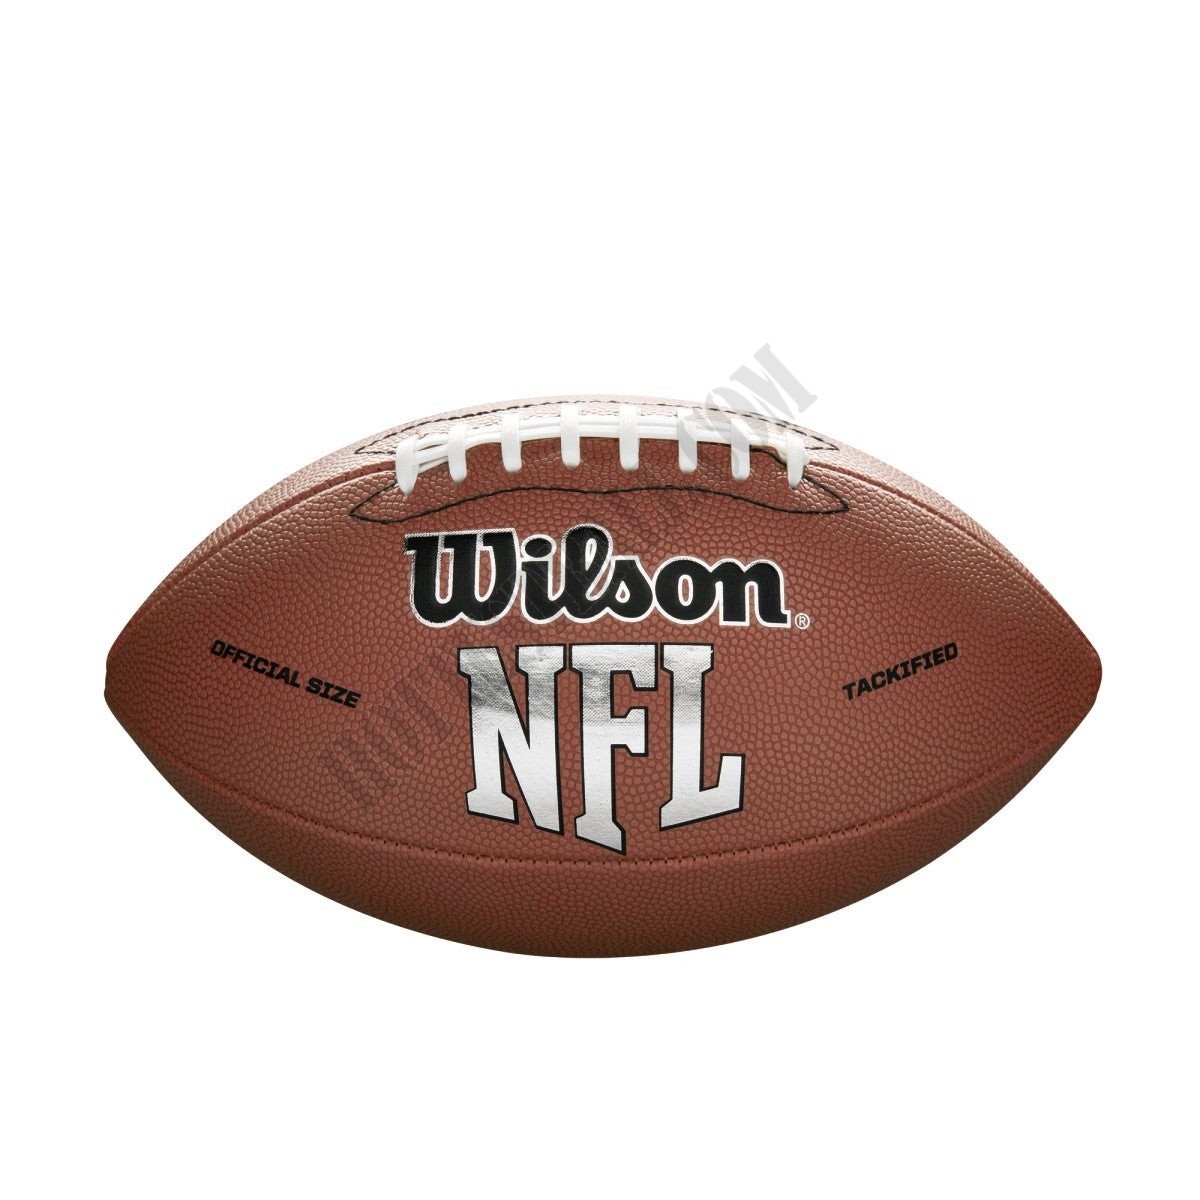 NFL MVP Football - Official ● Wilson Promotions - NFL MVP Football - Official ● Wilson Promotions